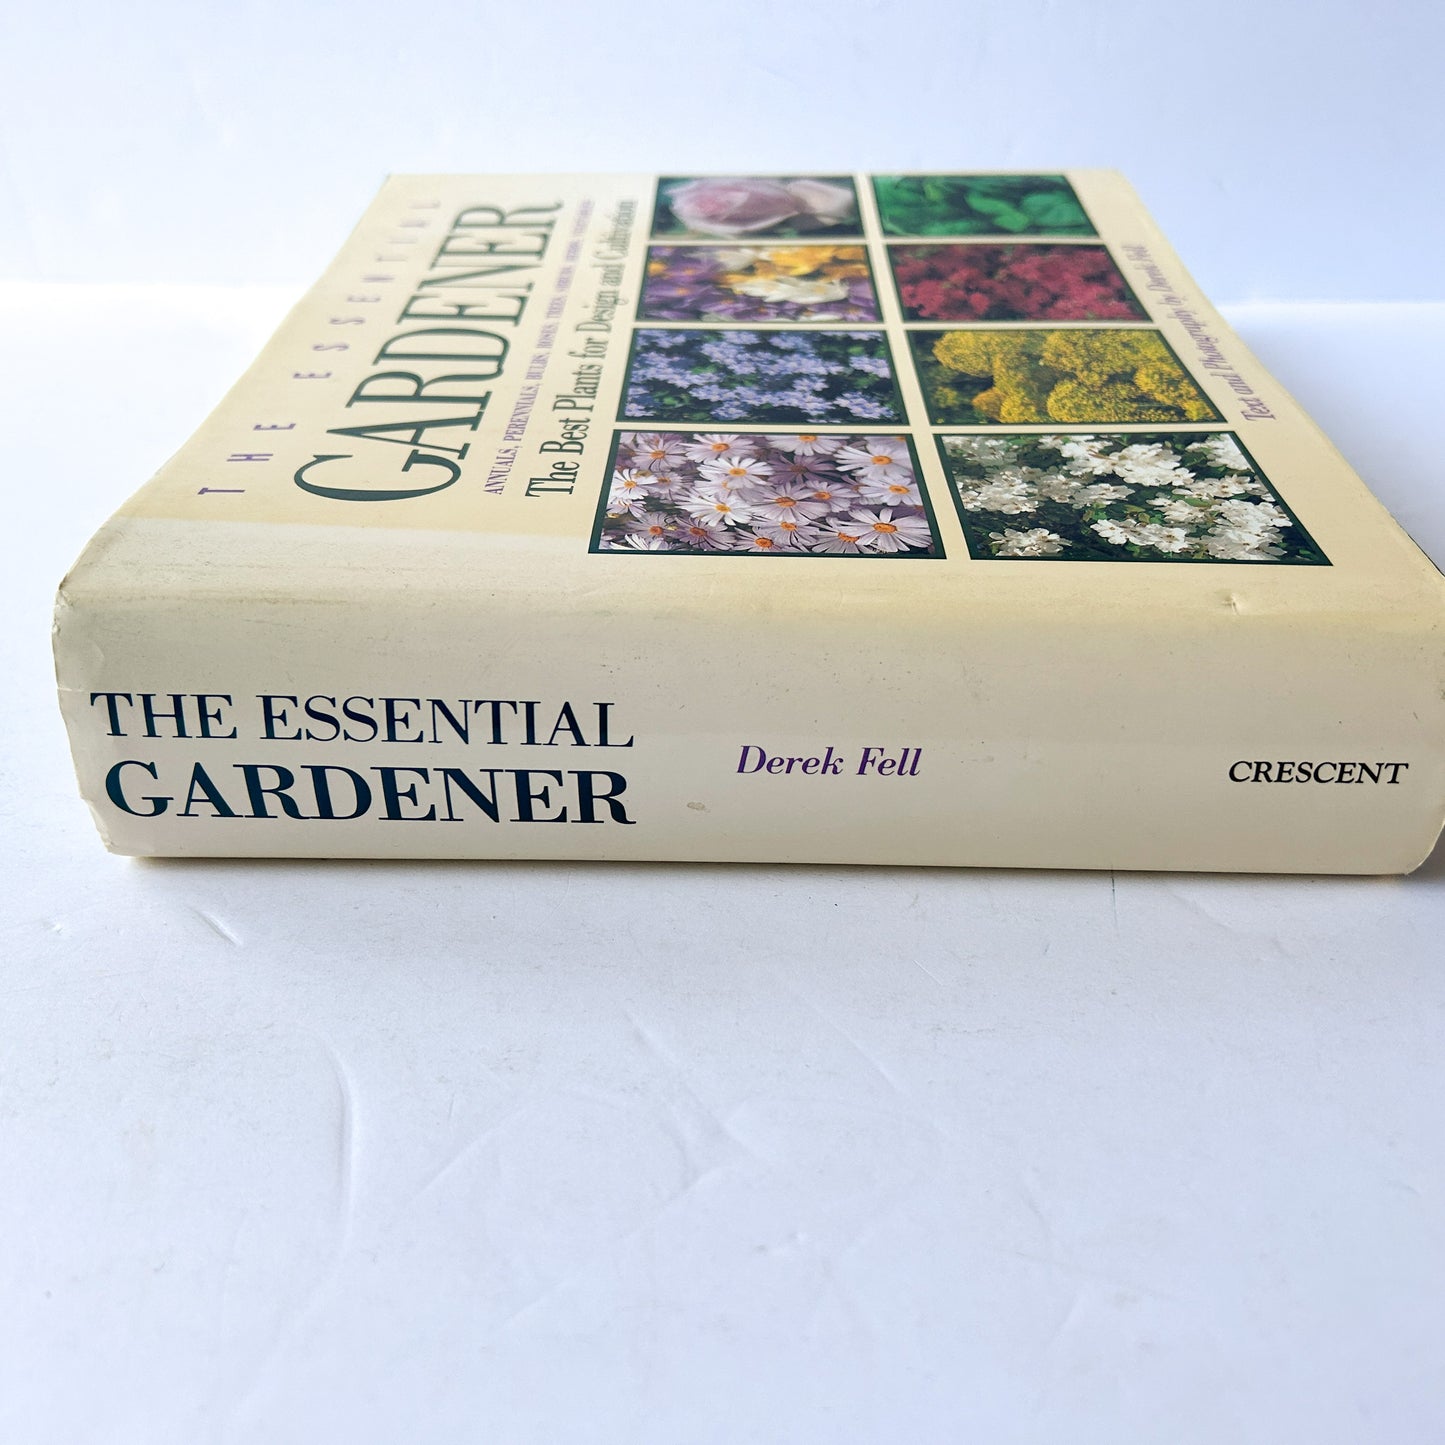 Vintage The Essential Gardener Book, Annuals, Perennials, Bulbs, Roses, Trees, Shrubs, Herbs and Vegetables